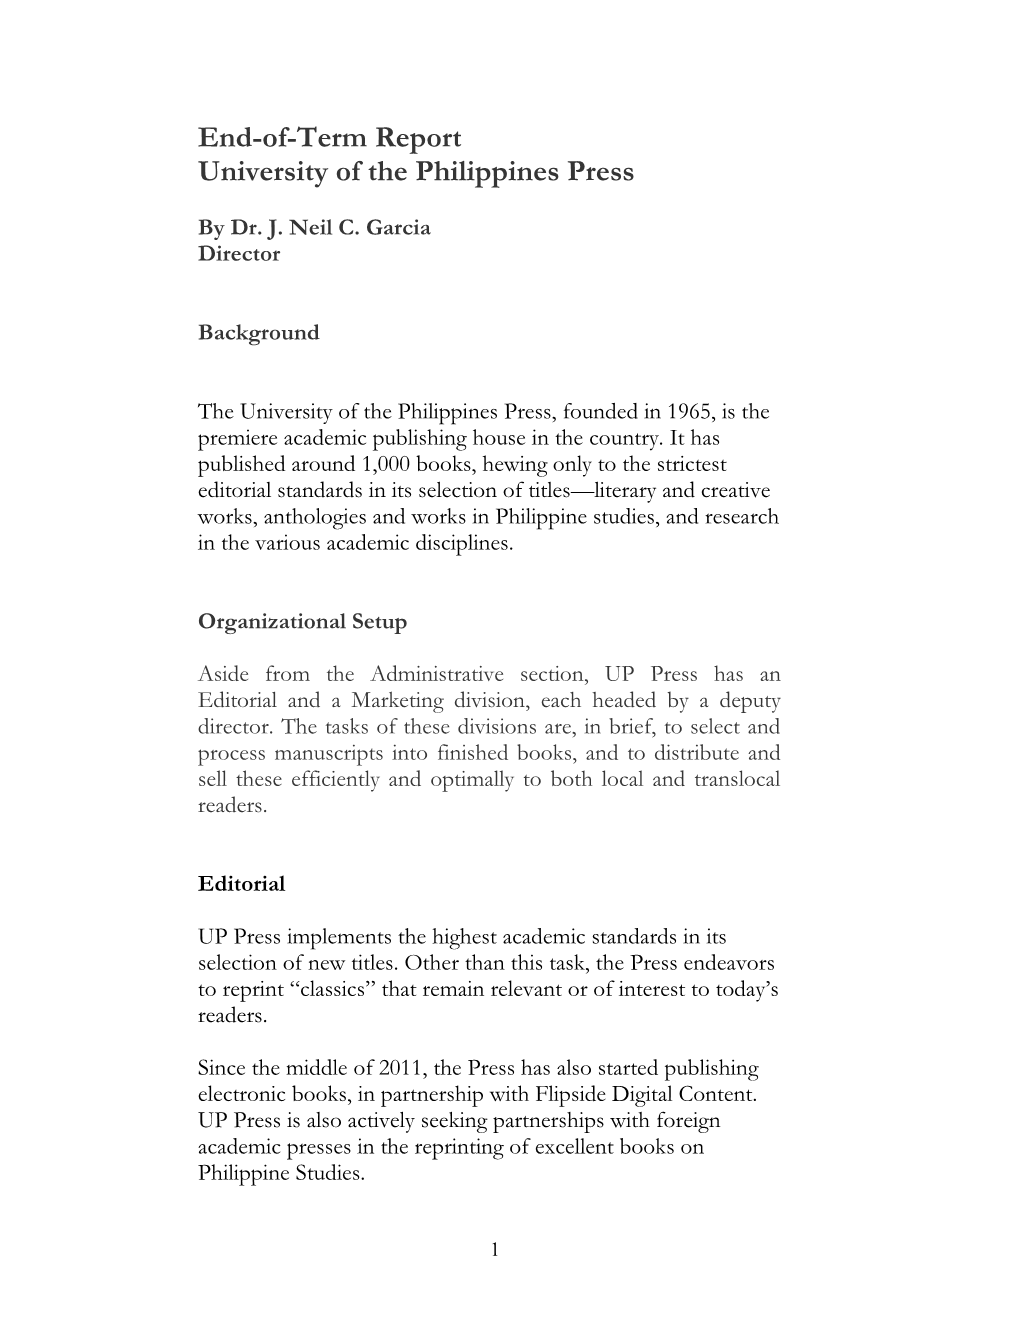 UP Press Has an Editorial and a Marketing Division, Each Headed by a Deputy Director